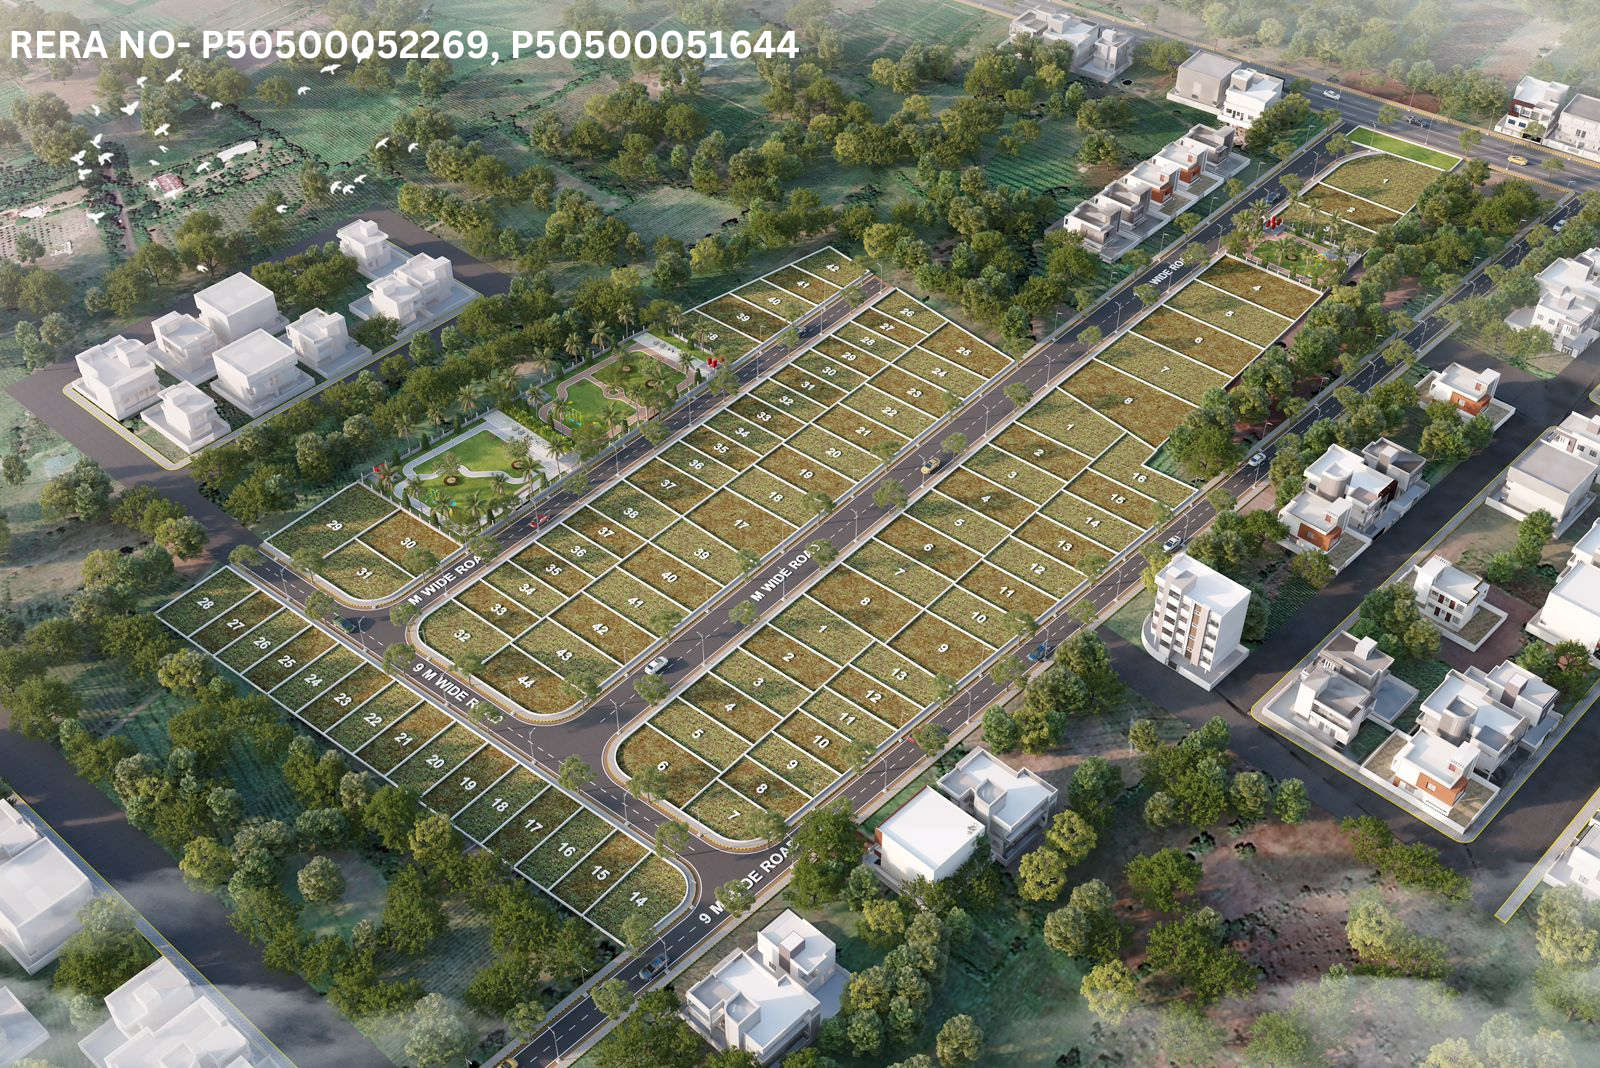 PLOTS FOR SALE IN NAGPUR